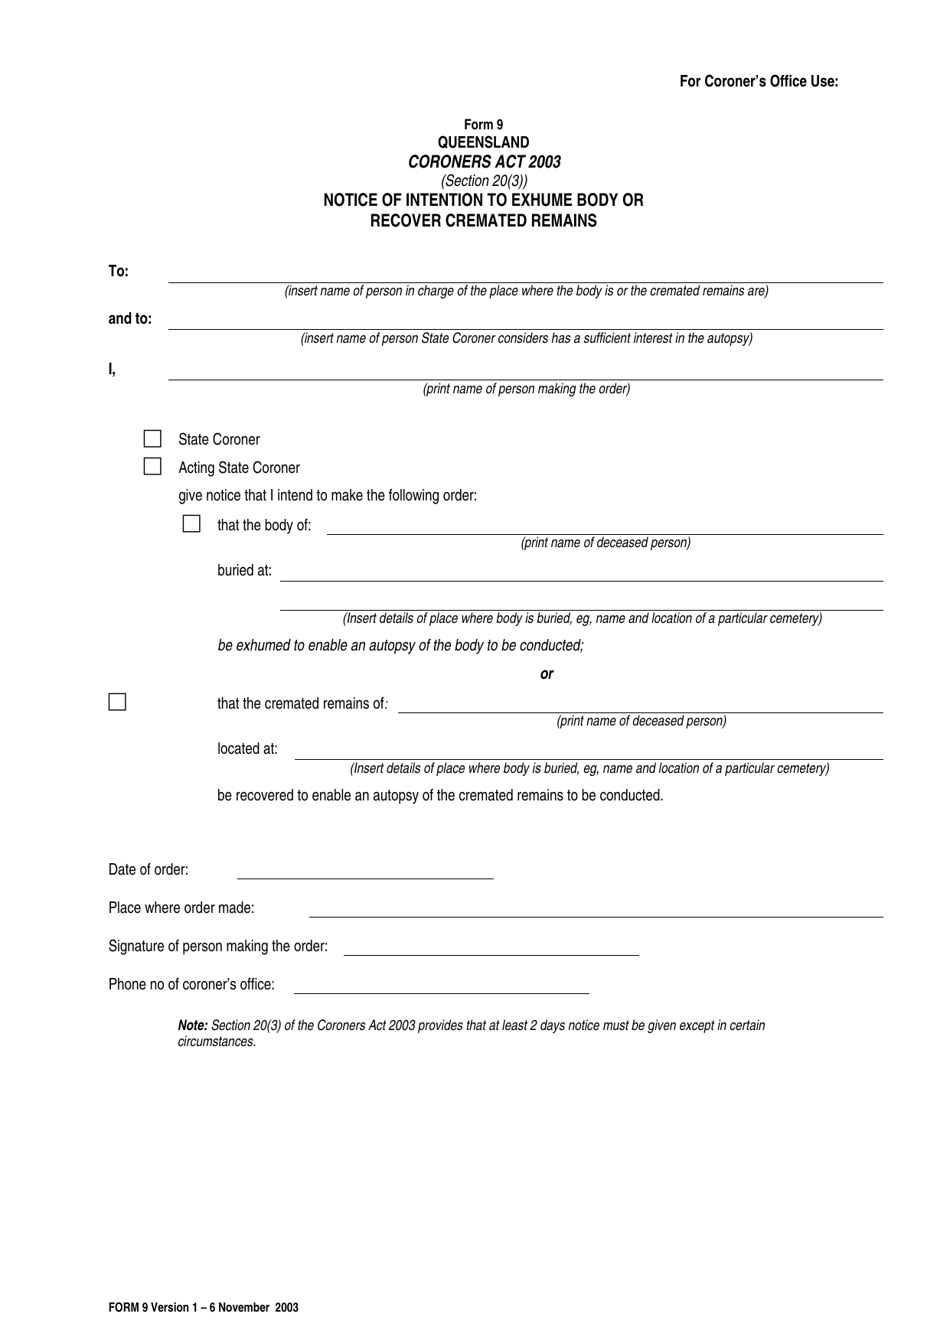 Form 9 Notice of Intention to Exhume Body or Recover Cremated Remains - Queensland, Australia, Page 1